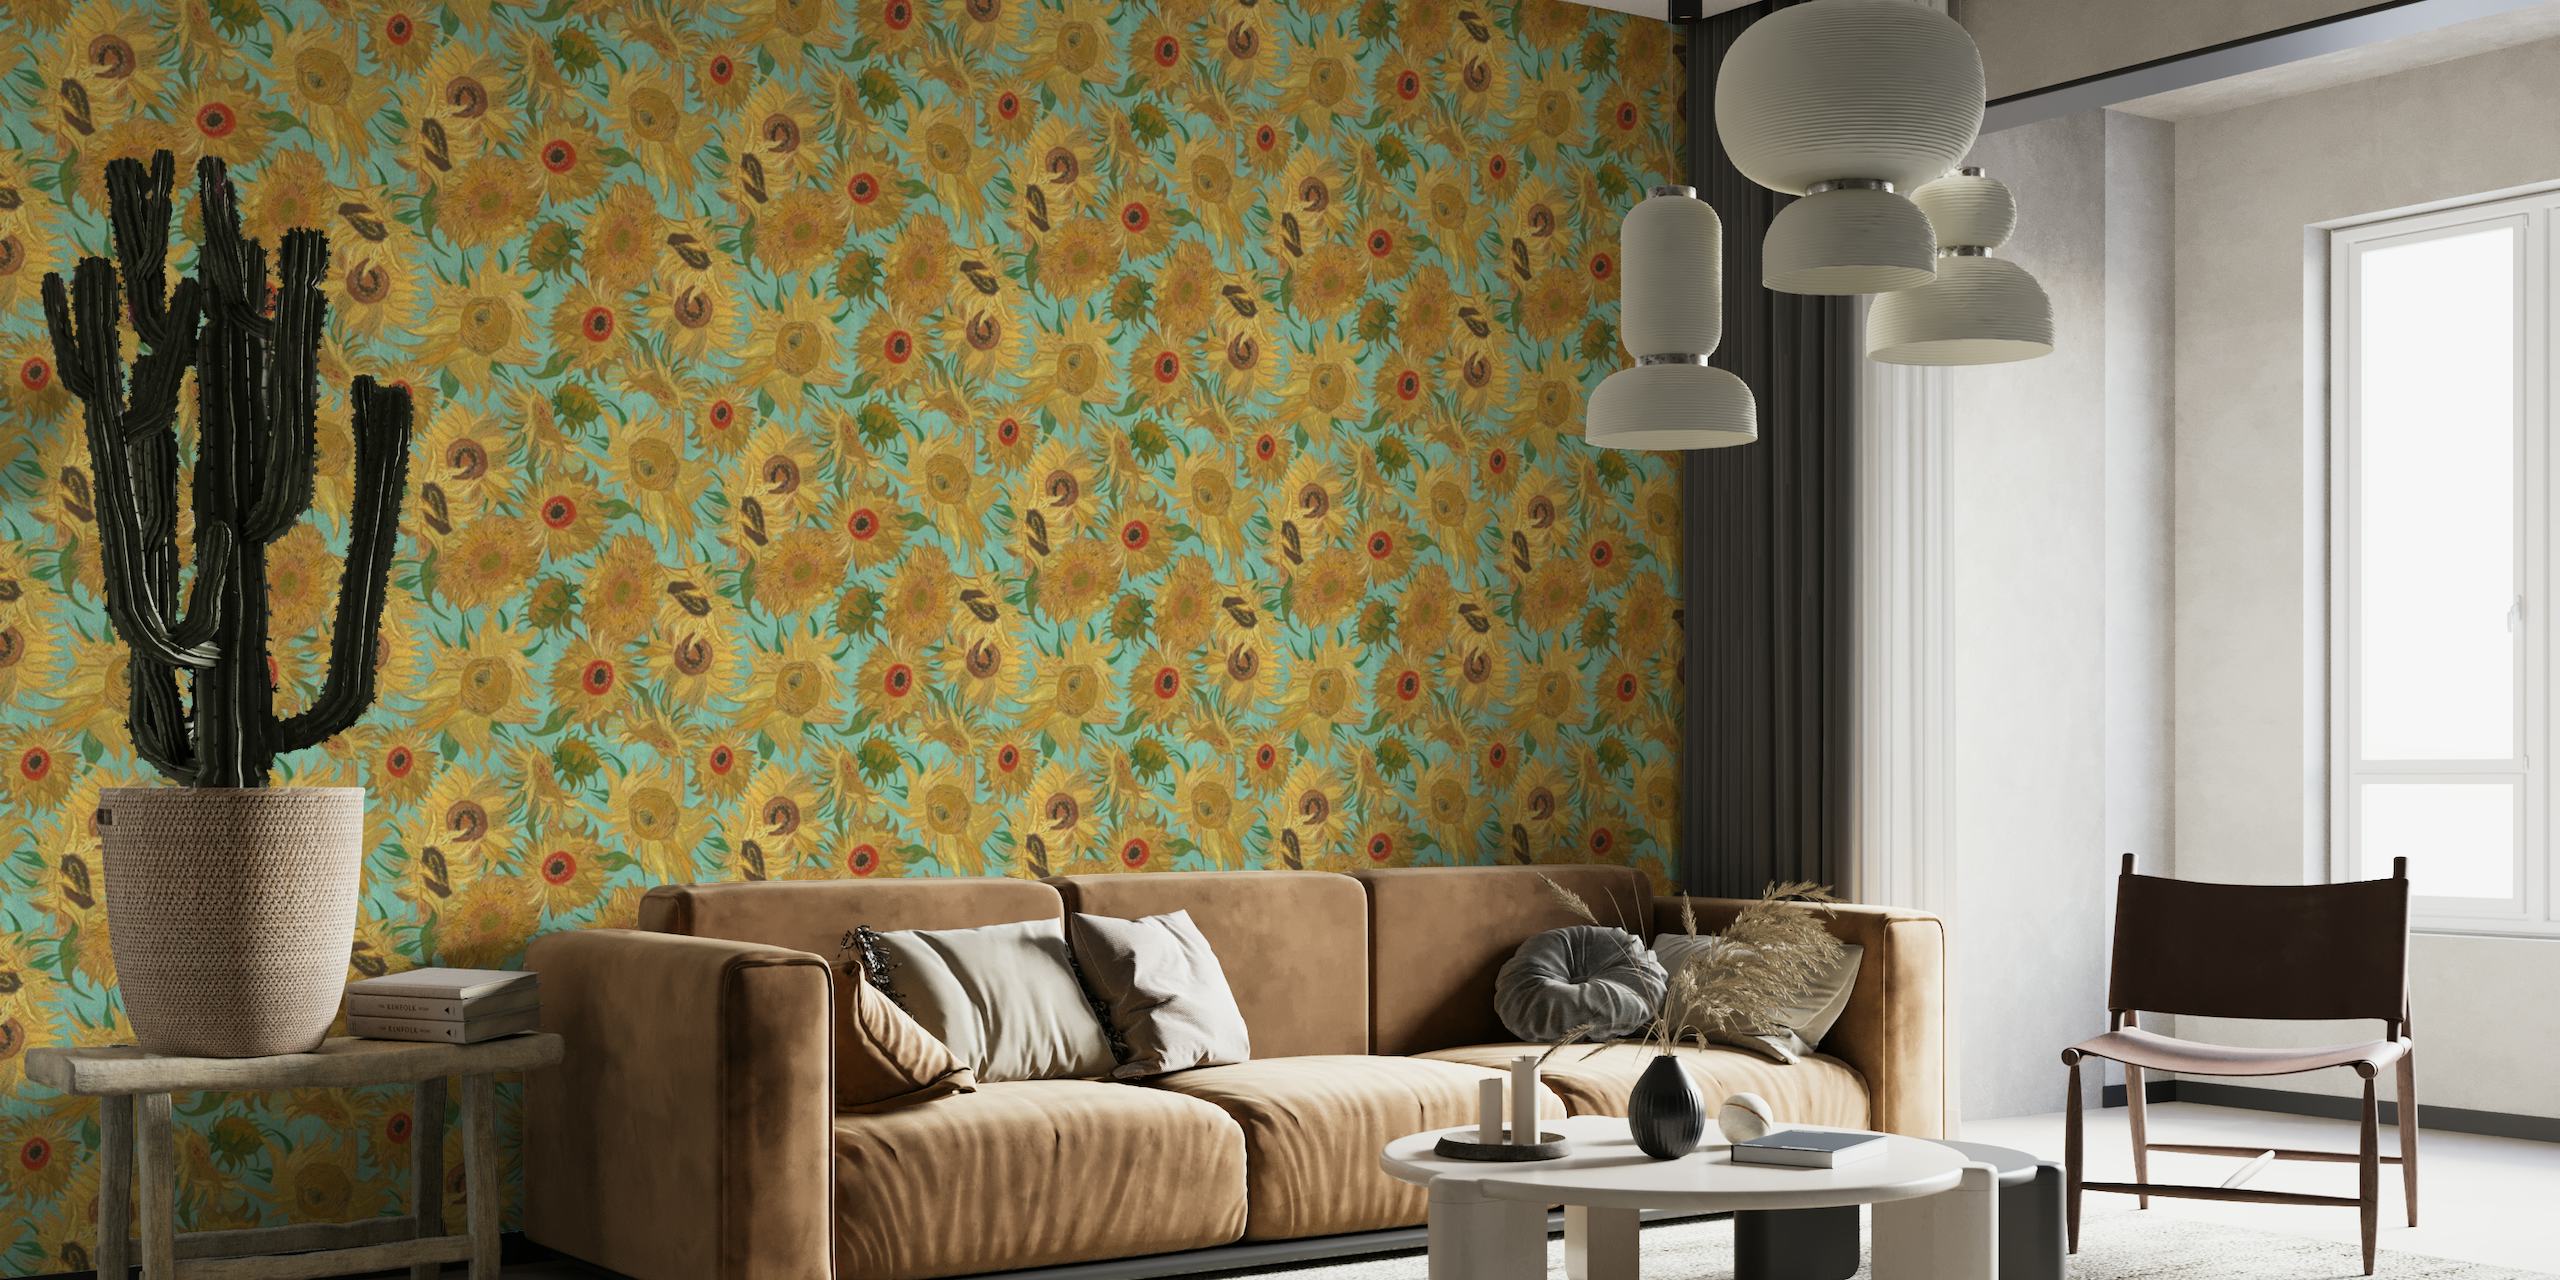 Van Gogh-inspired sunflower pattern wall mural with yellow, aqua, green, ochre, and red colors on happywall.com